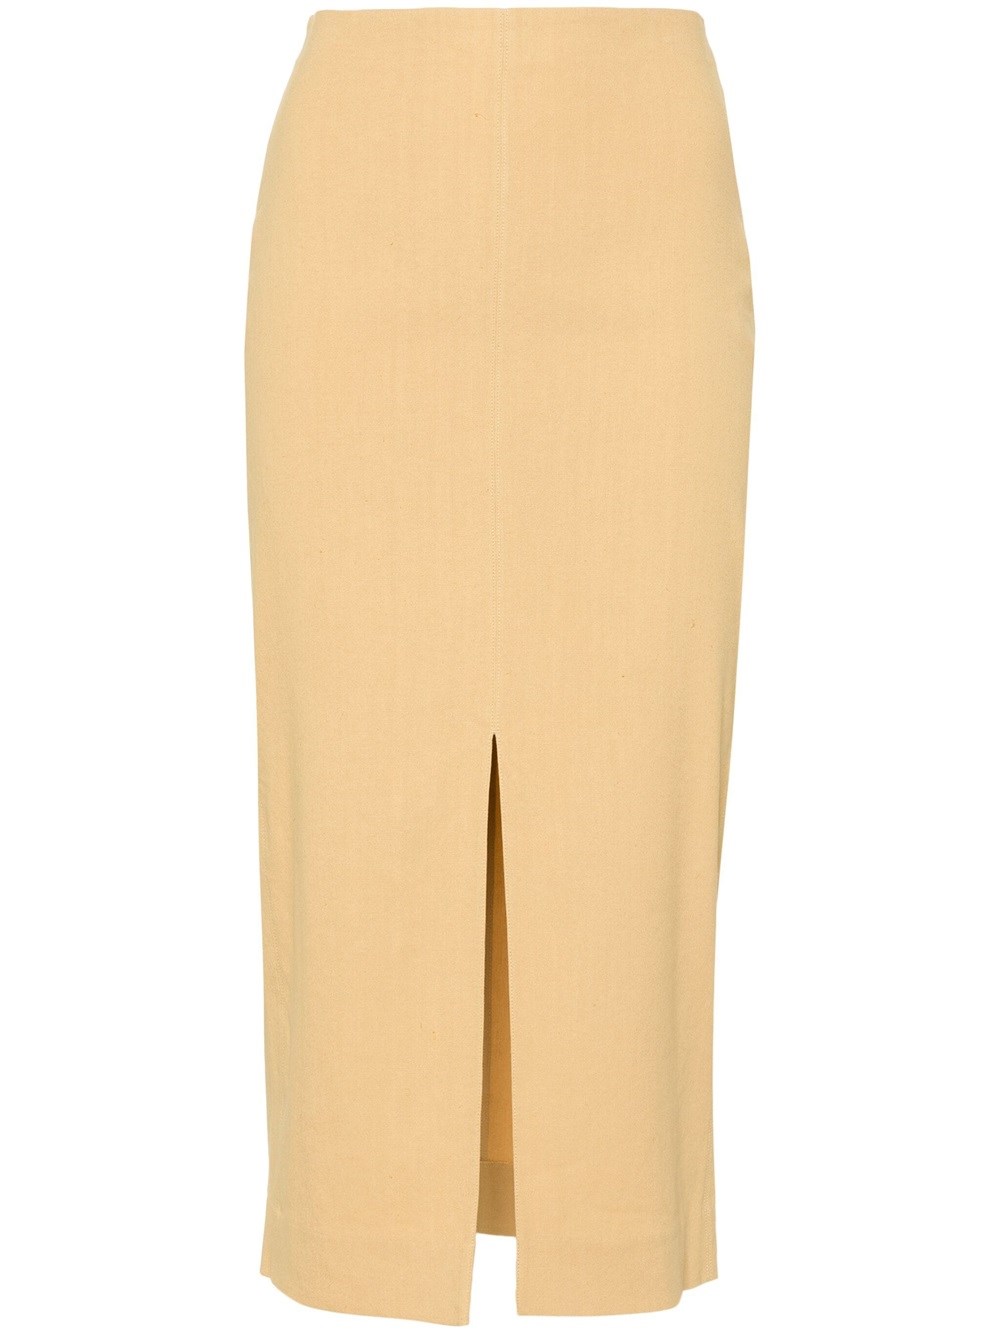 Shop Isabel Marant Mills Pencil Skirt With High Waist In Nude & Neutrals